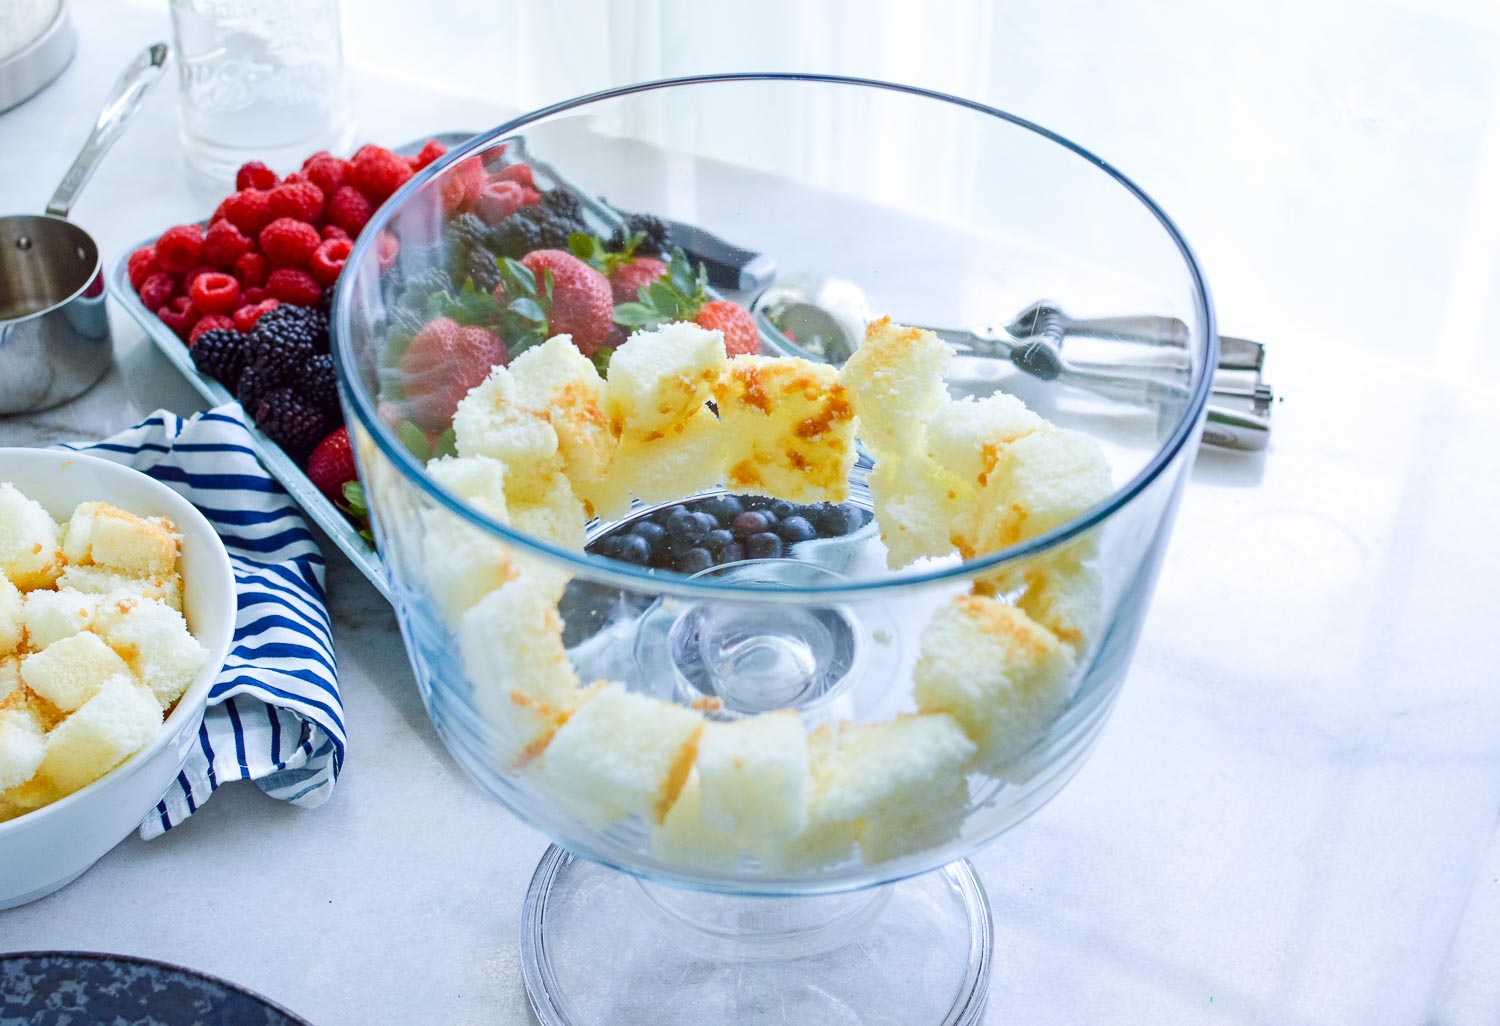 A mostly empty clear glass trifle dish with cut cake around the sides with a bowl of more cake and a plate filled with berries next to it with a metal measuring cup next to it.